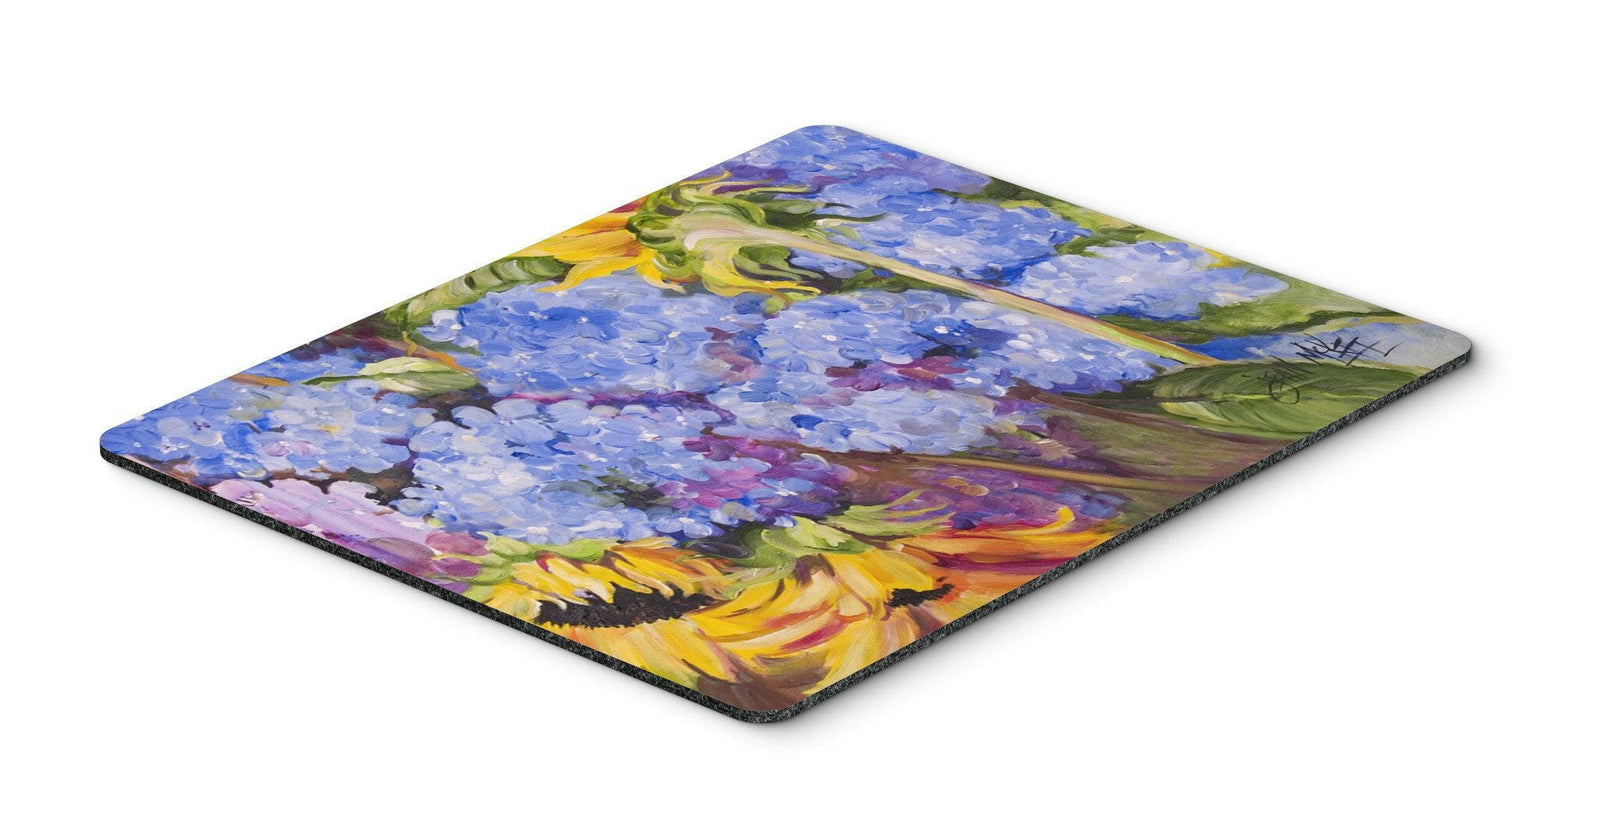 Hydrangeas and Sunflowers Mouse Pad, Hot Pad or Trivet JMK1119MP by Caroline's Treasures